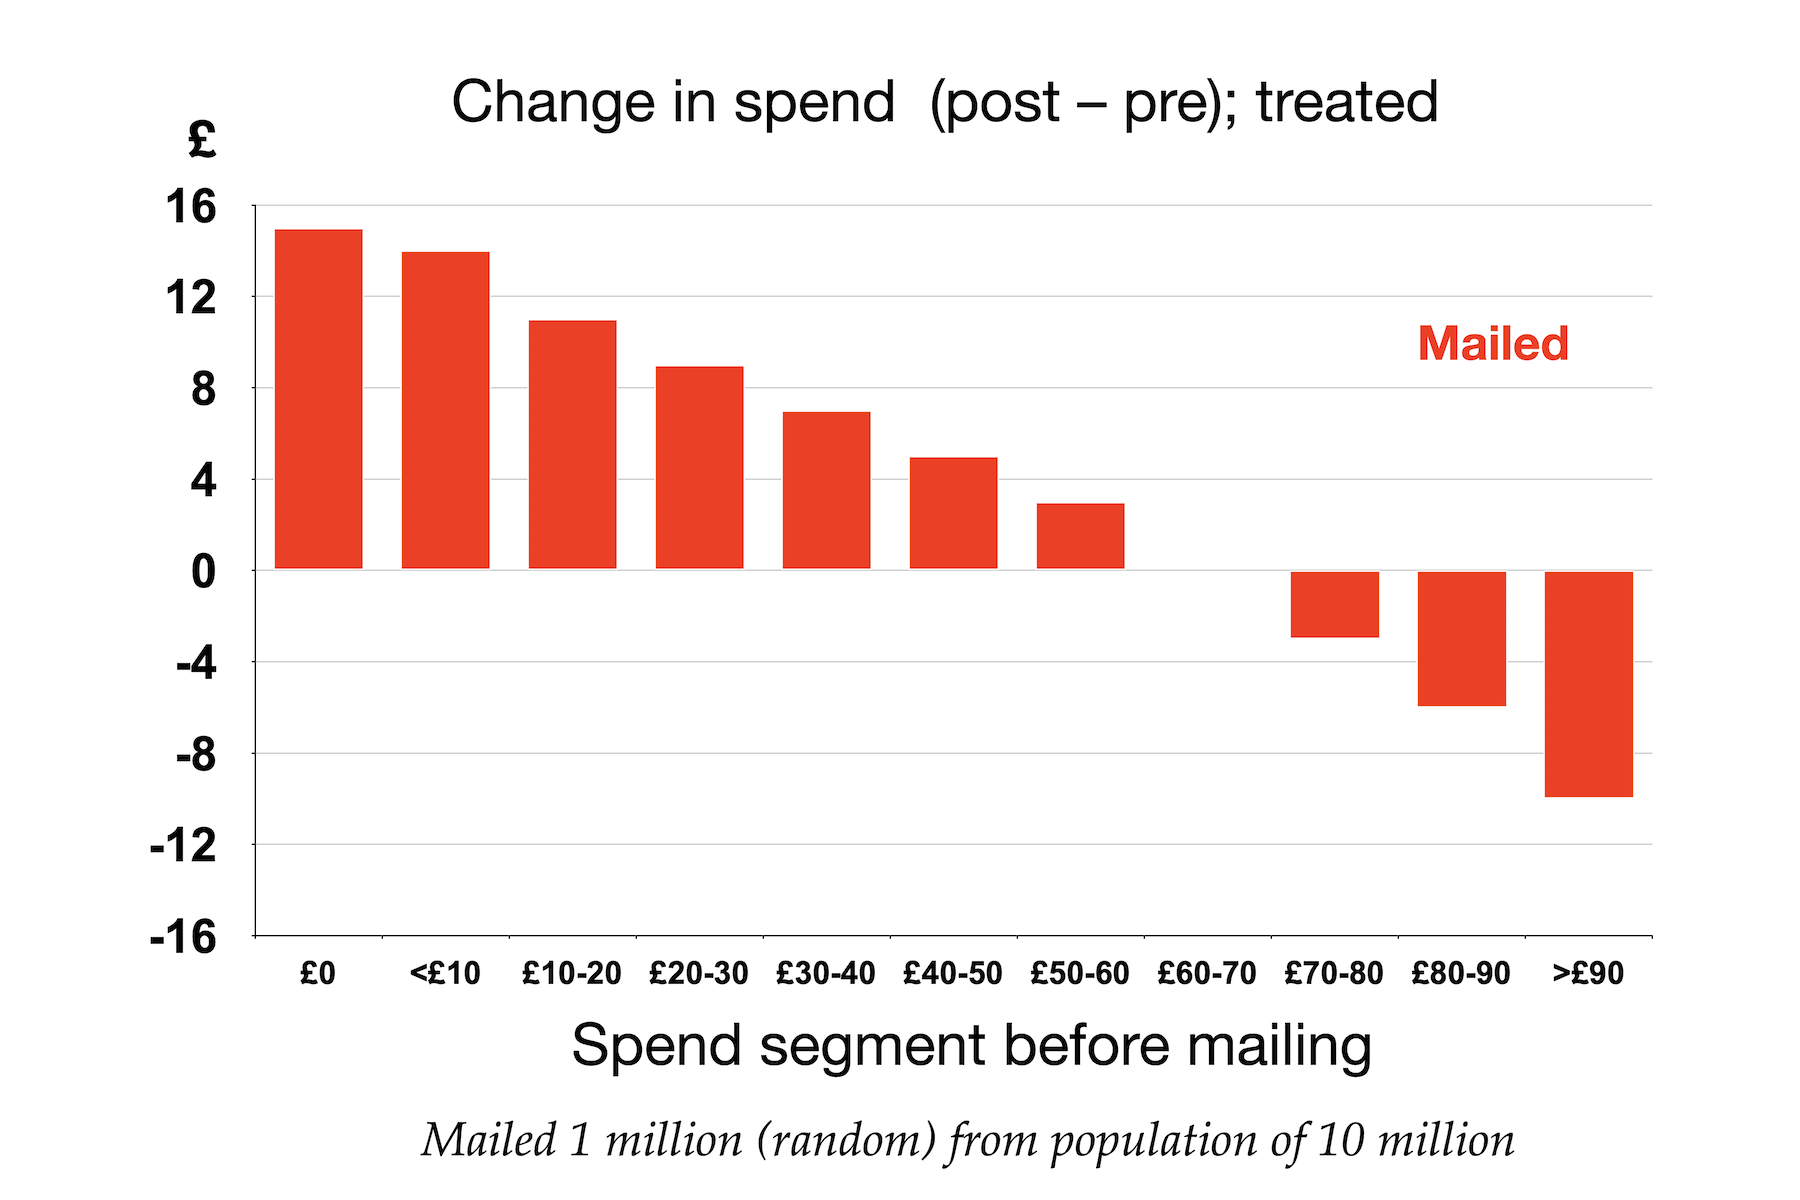 A bar graph showing a split of the treated population
          using average spend bands for the pre-period
          of £0, and £0.01 to £10, and ten-pound intervals
          up to £90, and finally a bar for over £90.
          The vertical scale is the change in spend between
          the pre- and post periods, quantified by the difference
          between them (post-spend minus pre-spend).
          The bars decrease monotonically, with the £0 group
          increasing spend by about £15, and these increases
          dropping to zero for the £60--70 per week group,
          and being negative to the tune of about £10 a week
          for those spending over £90 in the pre-period.